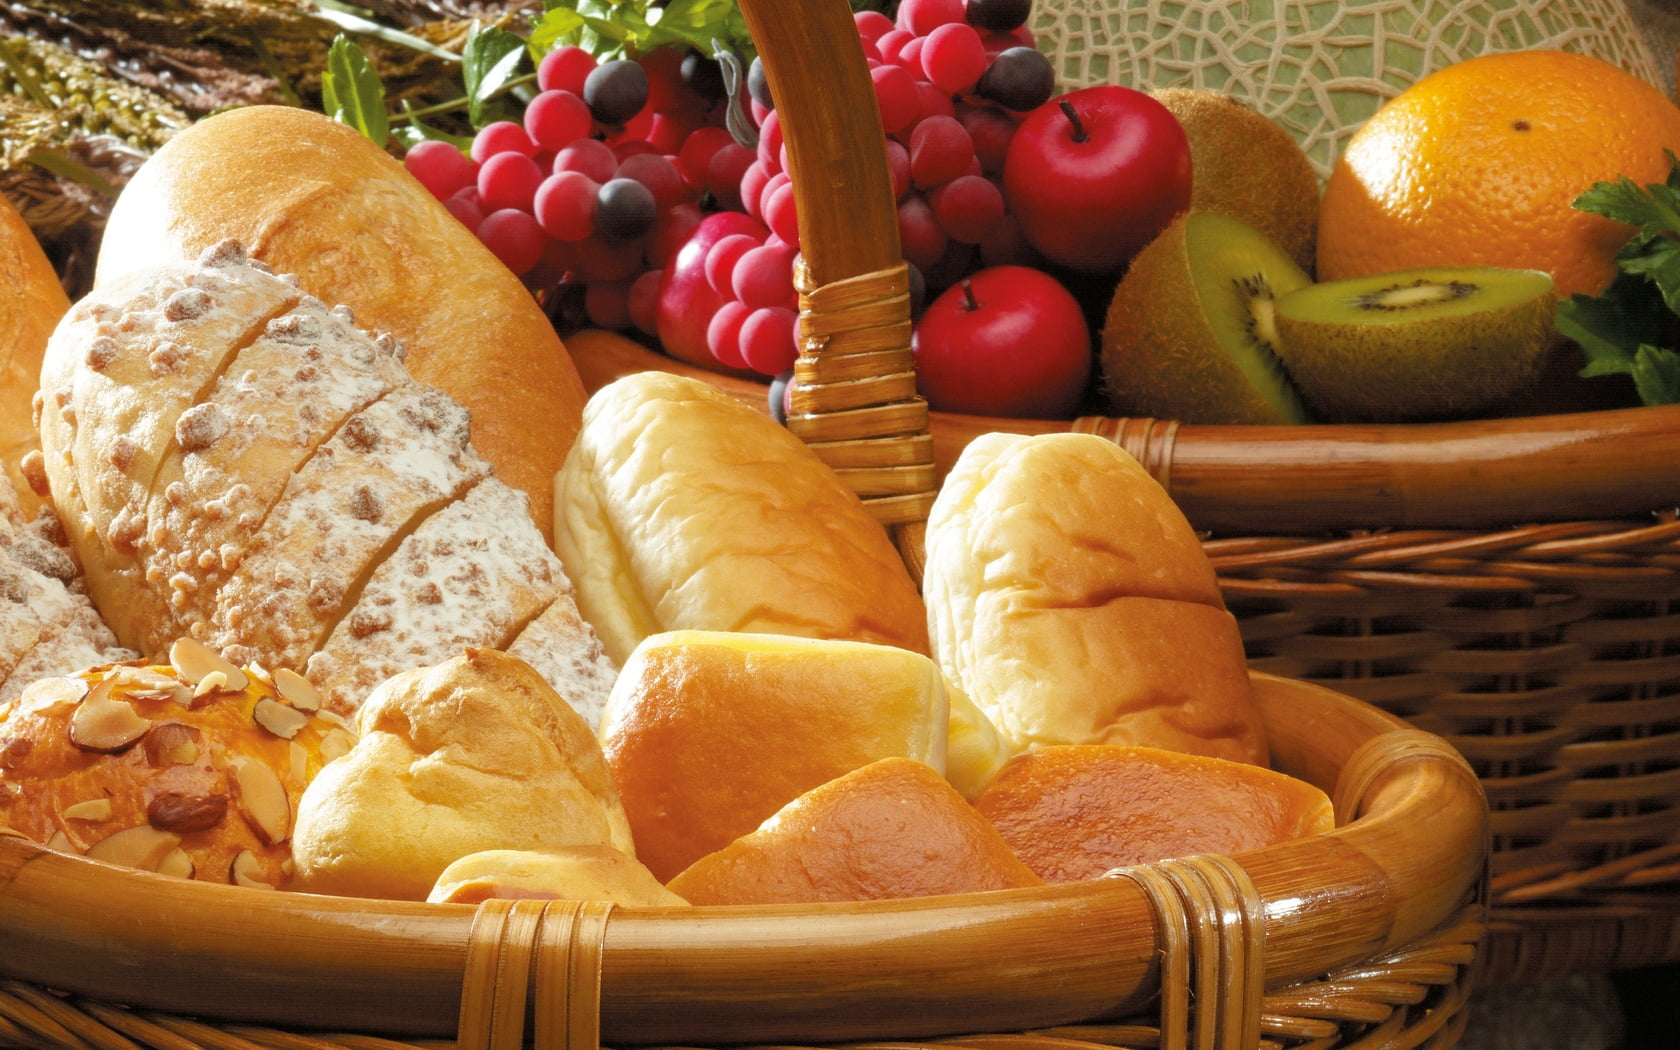 basket of bread, baskets, buns, pastries, white bread, biscuits